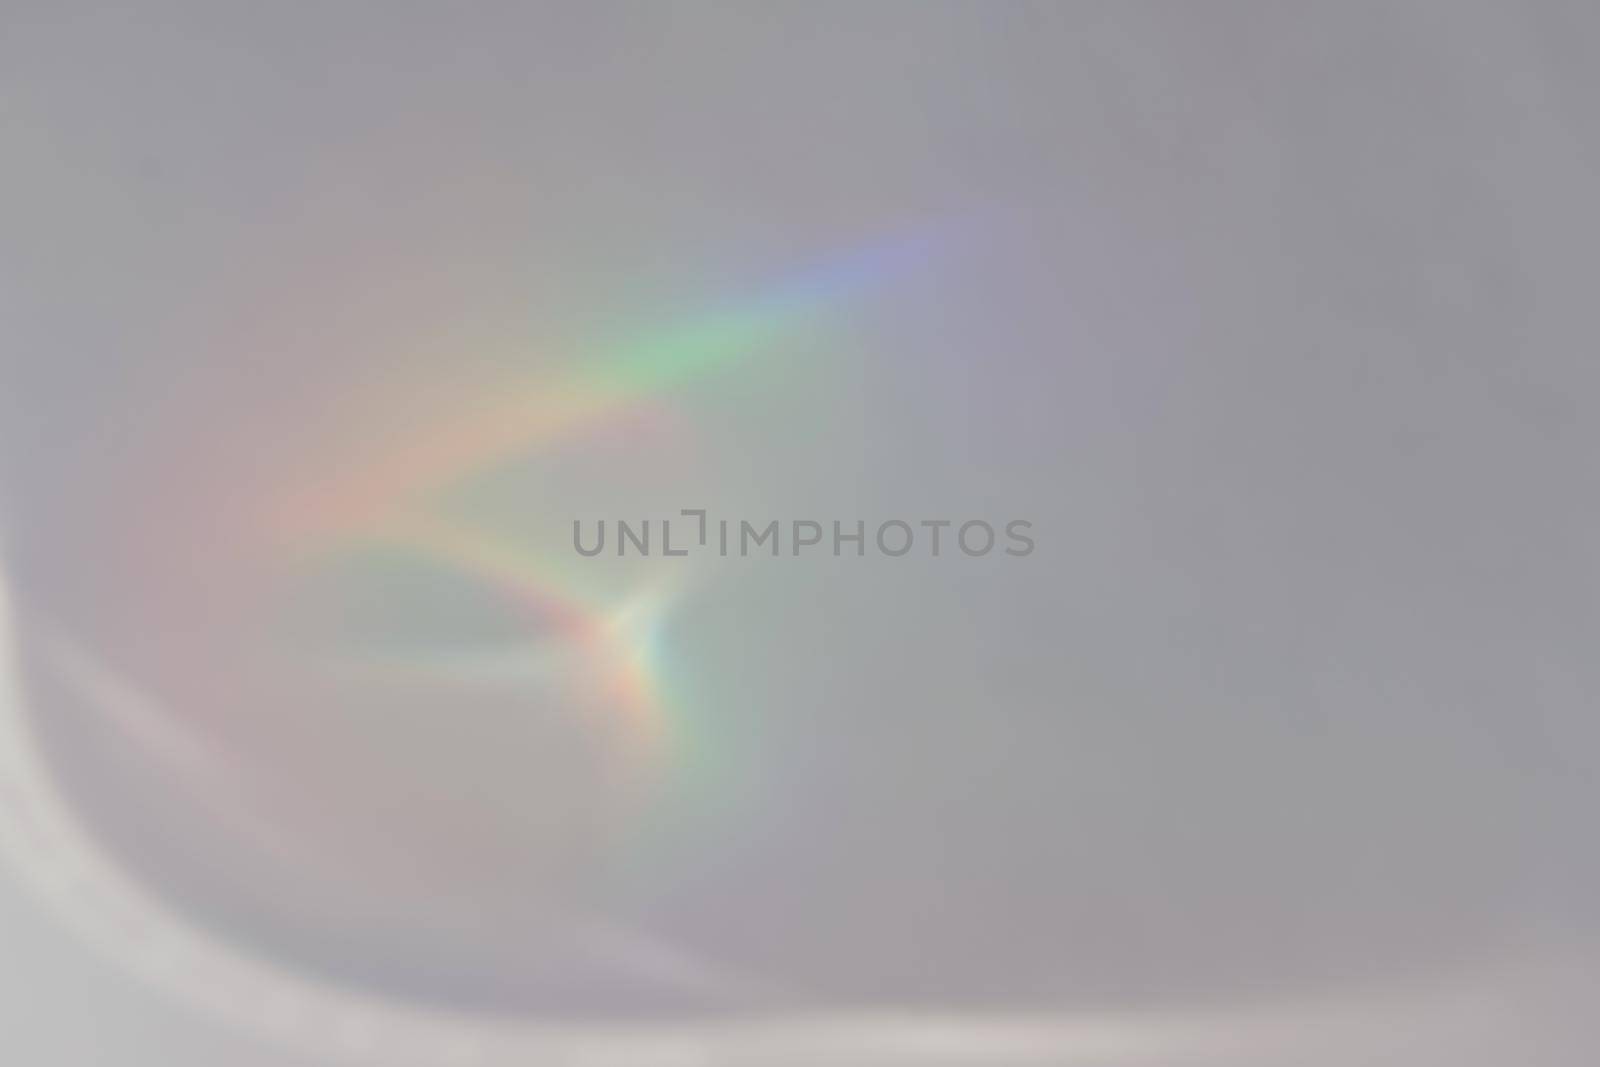 Abstract natural light refraction silhouette on water surface mock up.Caustic effect light refraction on white wall overlay photo mockup, blurred sun rays refracting through glass prism with shadow